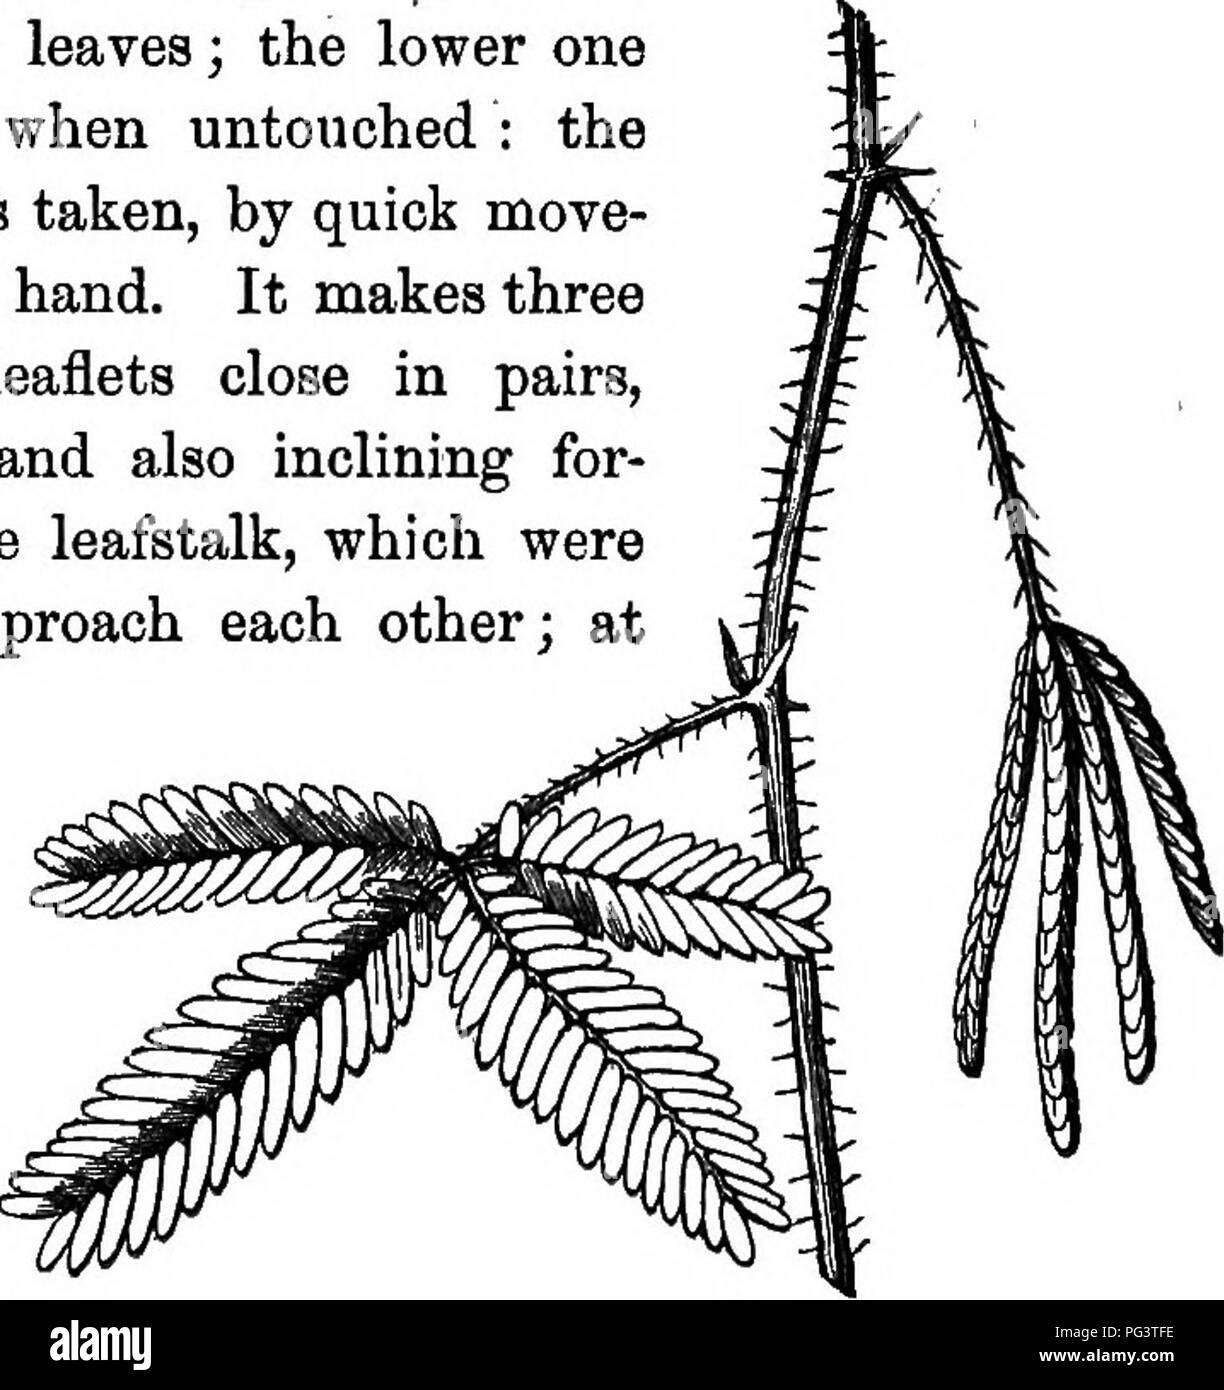 . Botany for young people : Part II. How plants behave ; how they move, climb, employ insects to work for them, &amp; c. Botany. HOW PLANTS BEHAVE, CHAPTER I. HOW PLANTS MOVE, CLIMB, AND TAKE POSITIONS. 1. Two plants — one of them common in cultivation, and the other rarer, but almost as easy to raise — are looked upon as vegetable wonders, namely, the Sensitive Plant and Desmodium gyrans. They are striking examples of 2. Plants that move their leaves freely and rapidly. In the well-known Sensitive Plant {Mimosa pudica) the foliage quickly changes its position when touched, appearing to shrink Stock Photo